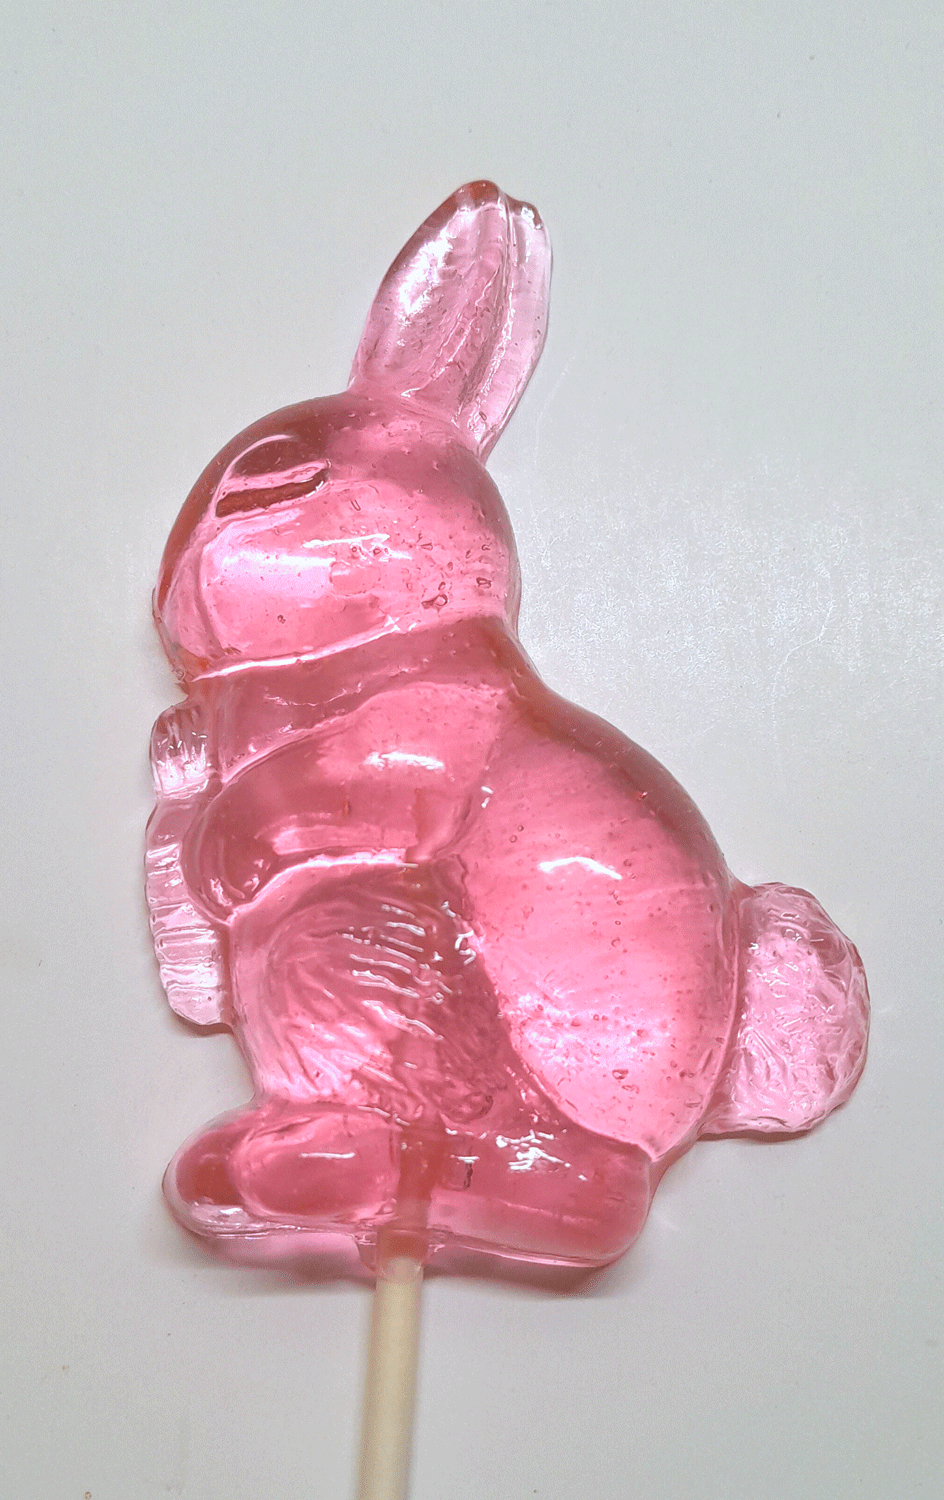 Large Bunny Lollipops in Various Colors: Tropical Punch Flavor / Pink